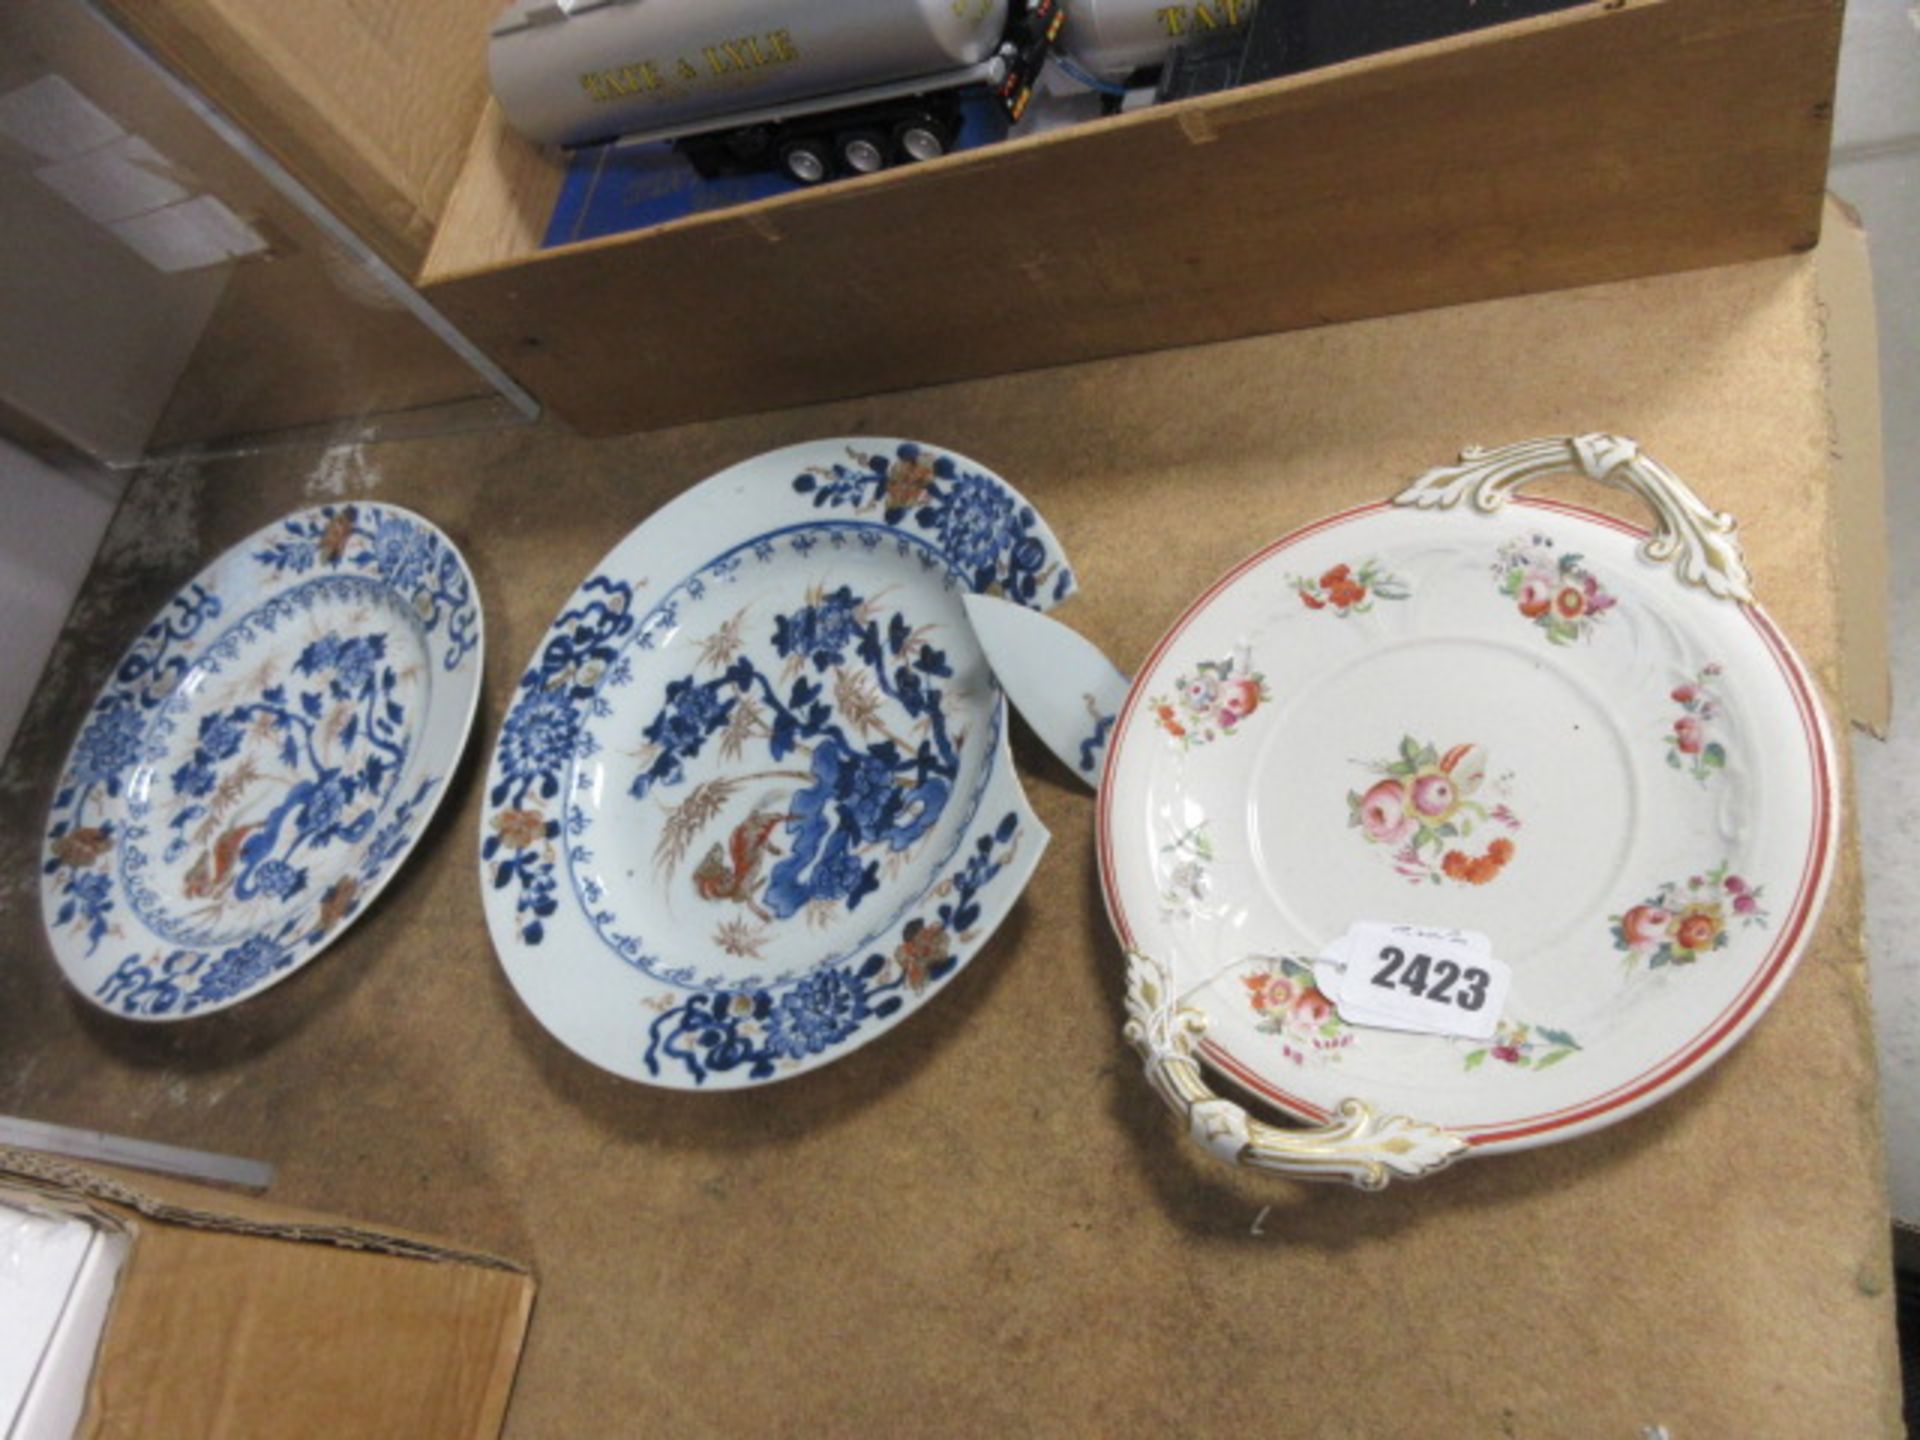 368 (rr 6/3) A pair of cabinet plates decorated in the chinoiserie manner, d. 23 cm, together with a